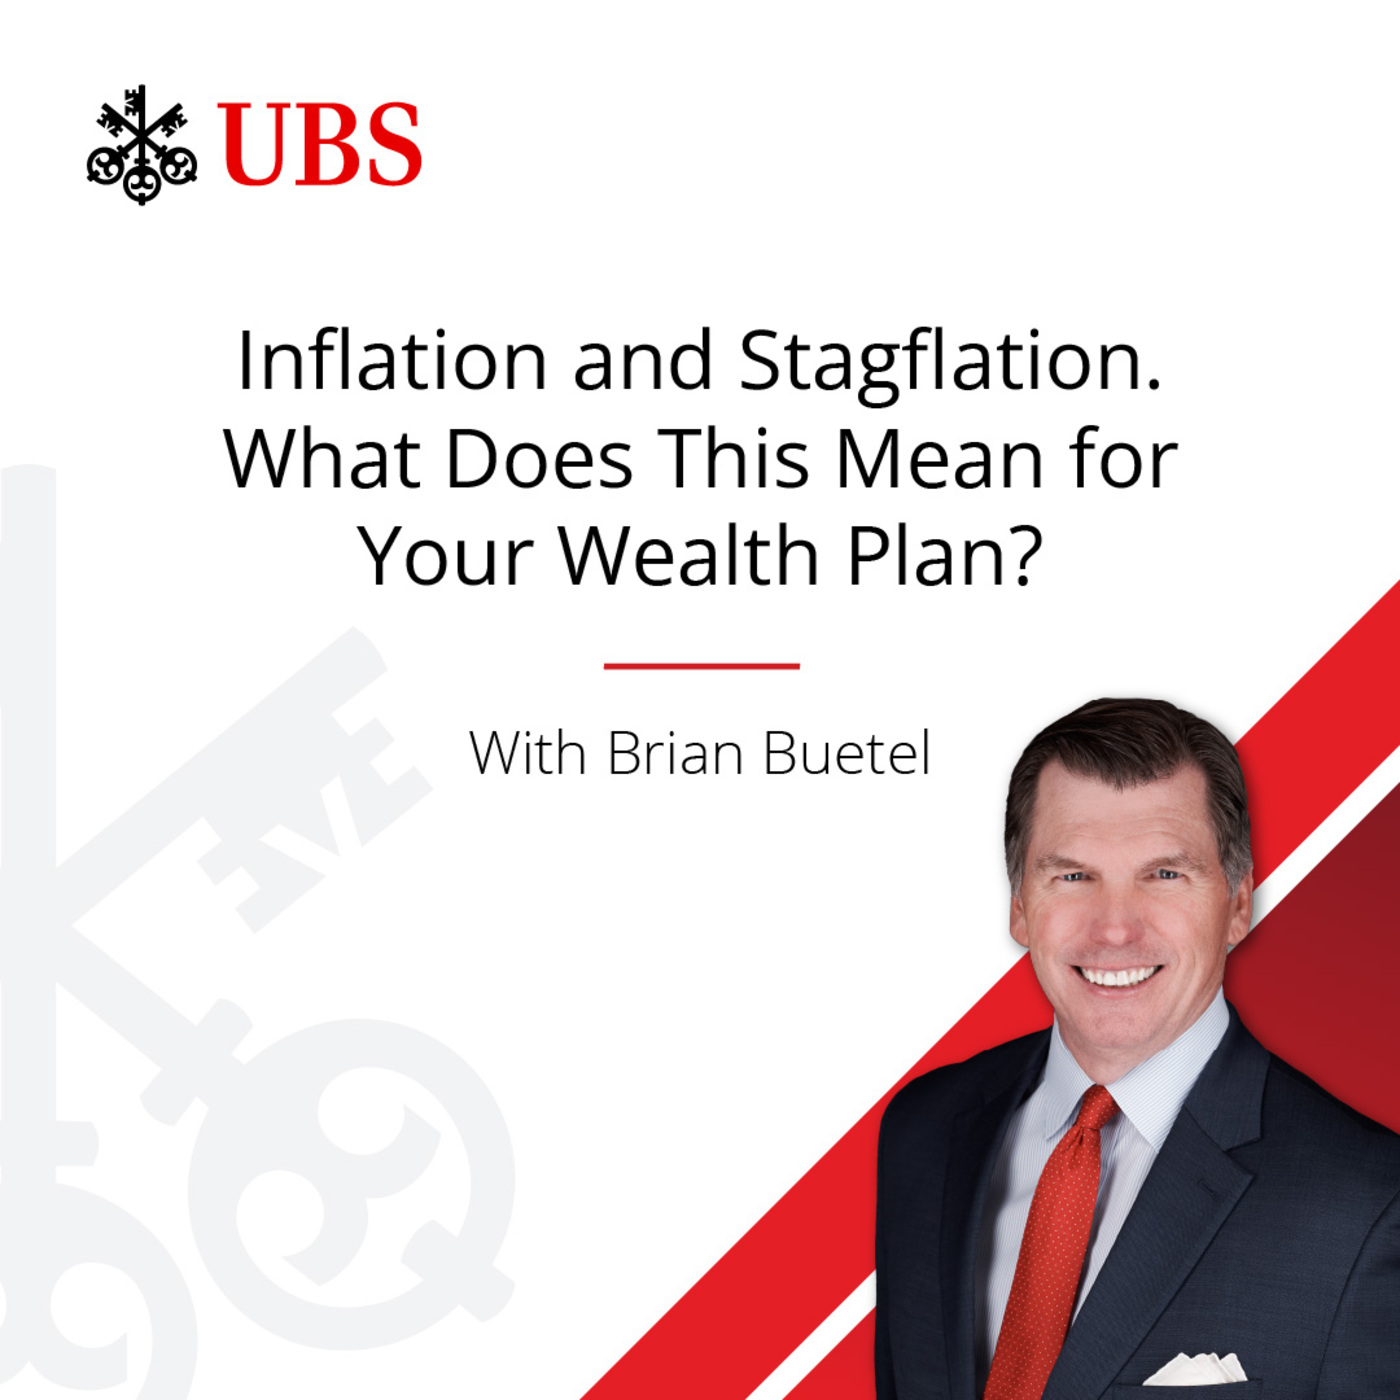 Inflation and Stagflation. What Does This Mean for Your Wealth Plan?